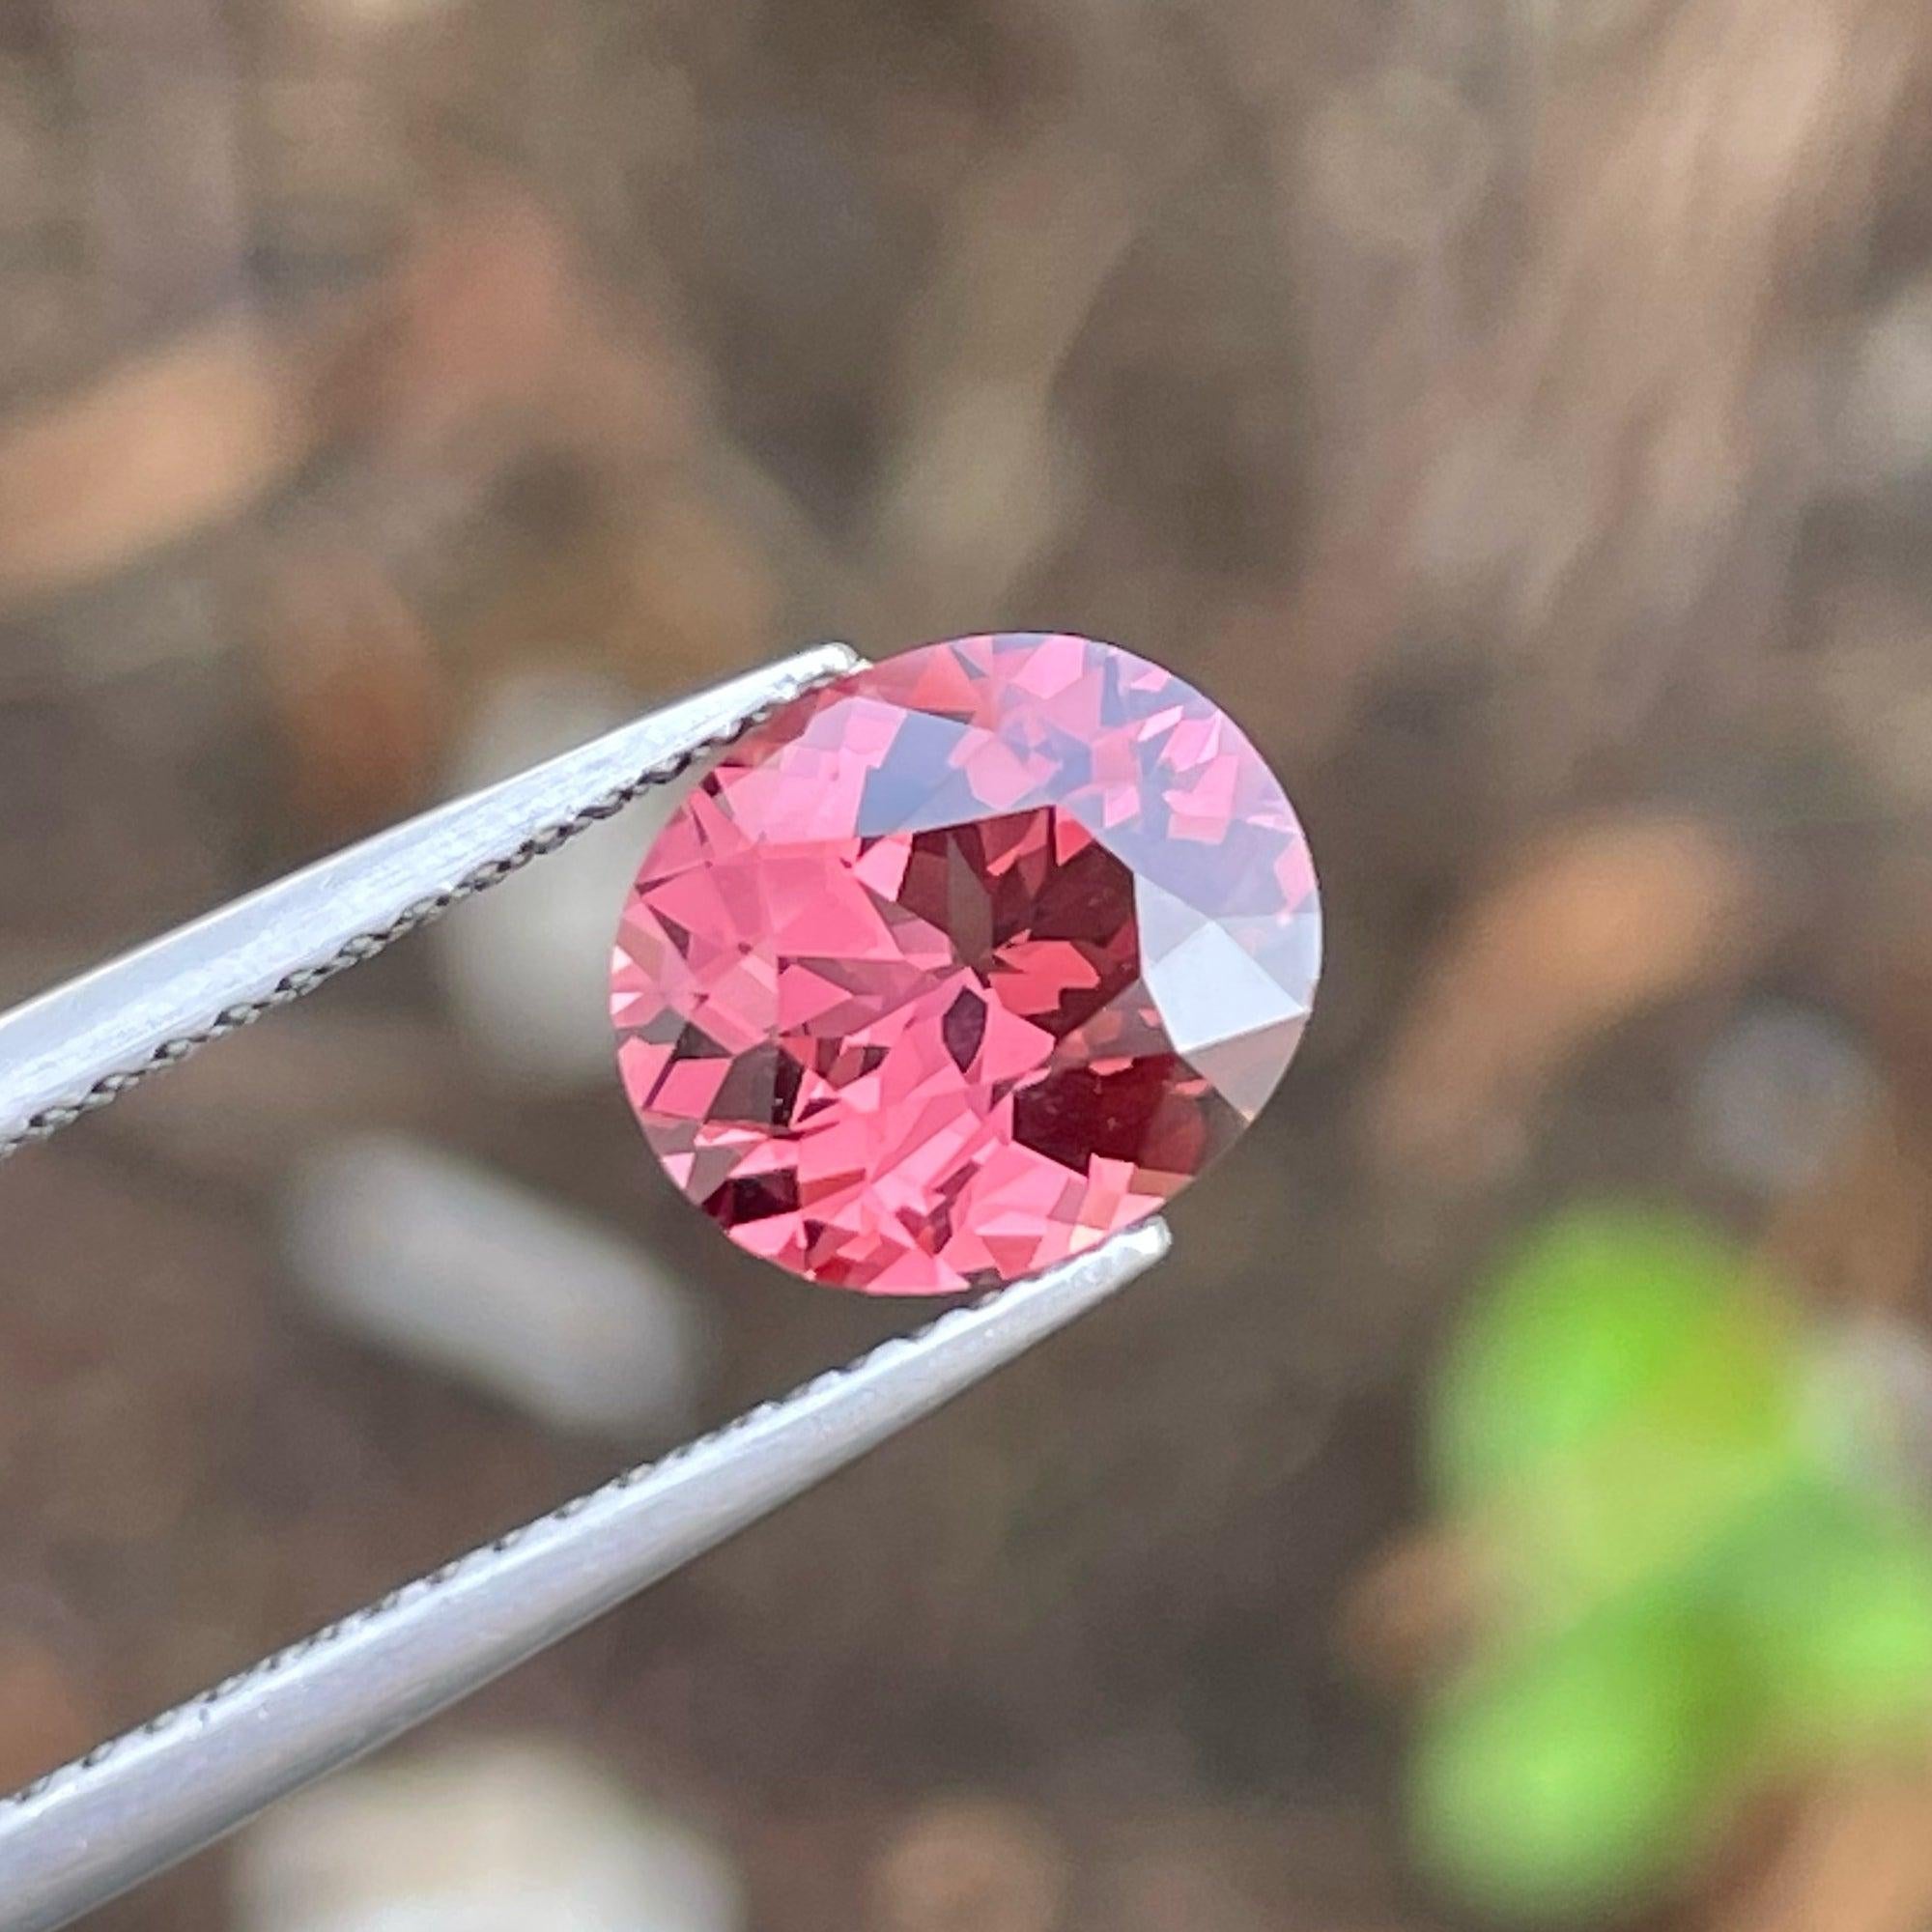 Adorable Natural Pink Spinel Gemstone, Available For Sale At Wholesale Price Natural High Quality 1.95 carats Eye Clean Clarity Natural Loose Spinel from Burma.

Product Information:
GEMSTONE TYPE:	Adorable Natural Pink Spinel Gemstone
WEIGHT:	1.95